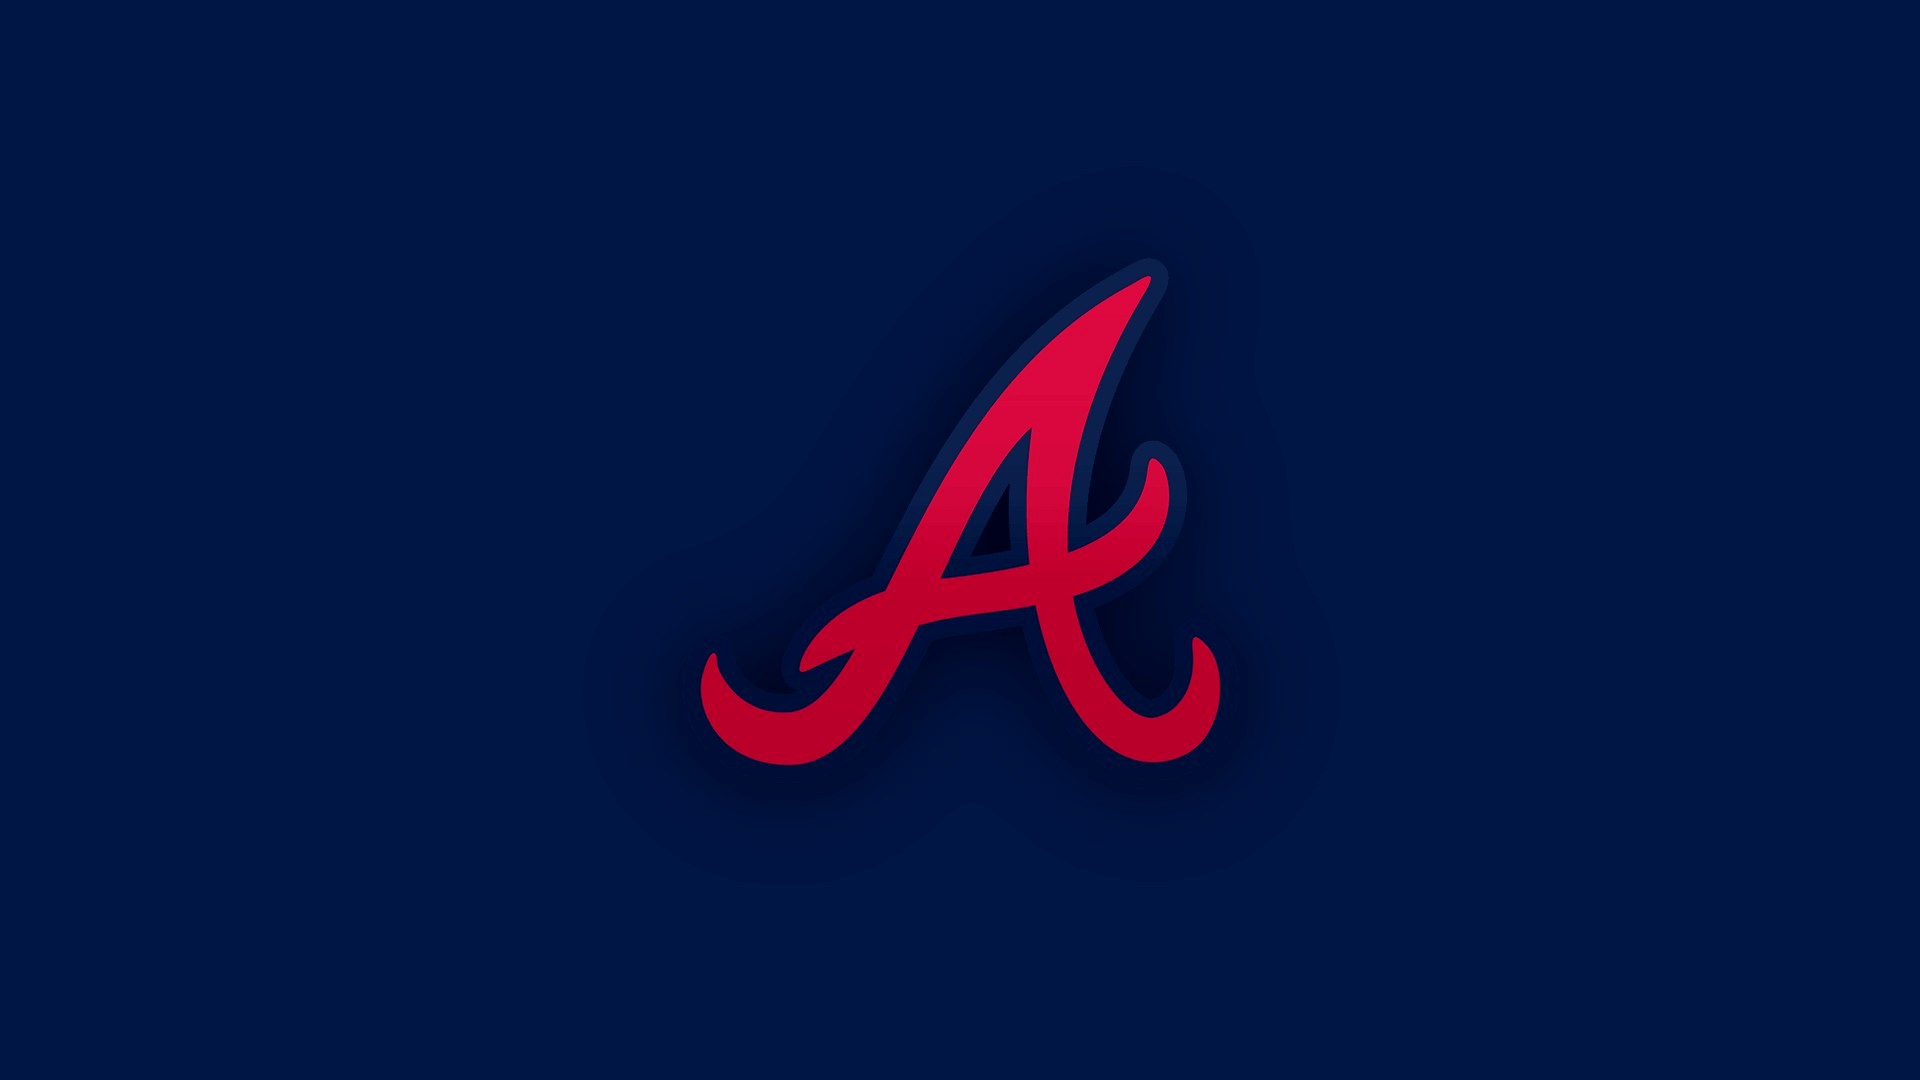 Atlanta Braves Laptop Wallpaper with high-resolution 1920x1080 pixel. You can use this wallpaper for Mac Desktop Wallpaper, Laptop Screensavers, Android Wallpapers, Tablet or iPhone Home Screen and another mobile phone device